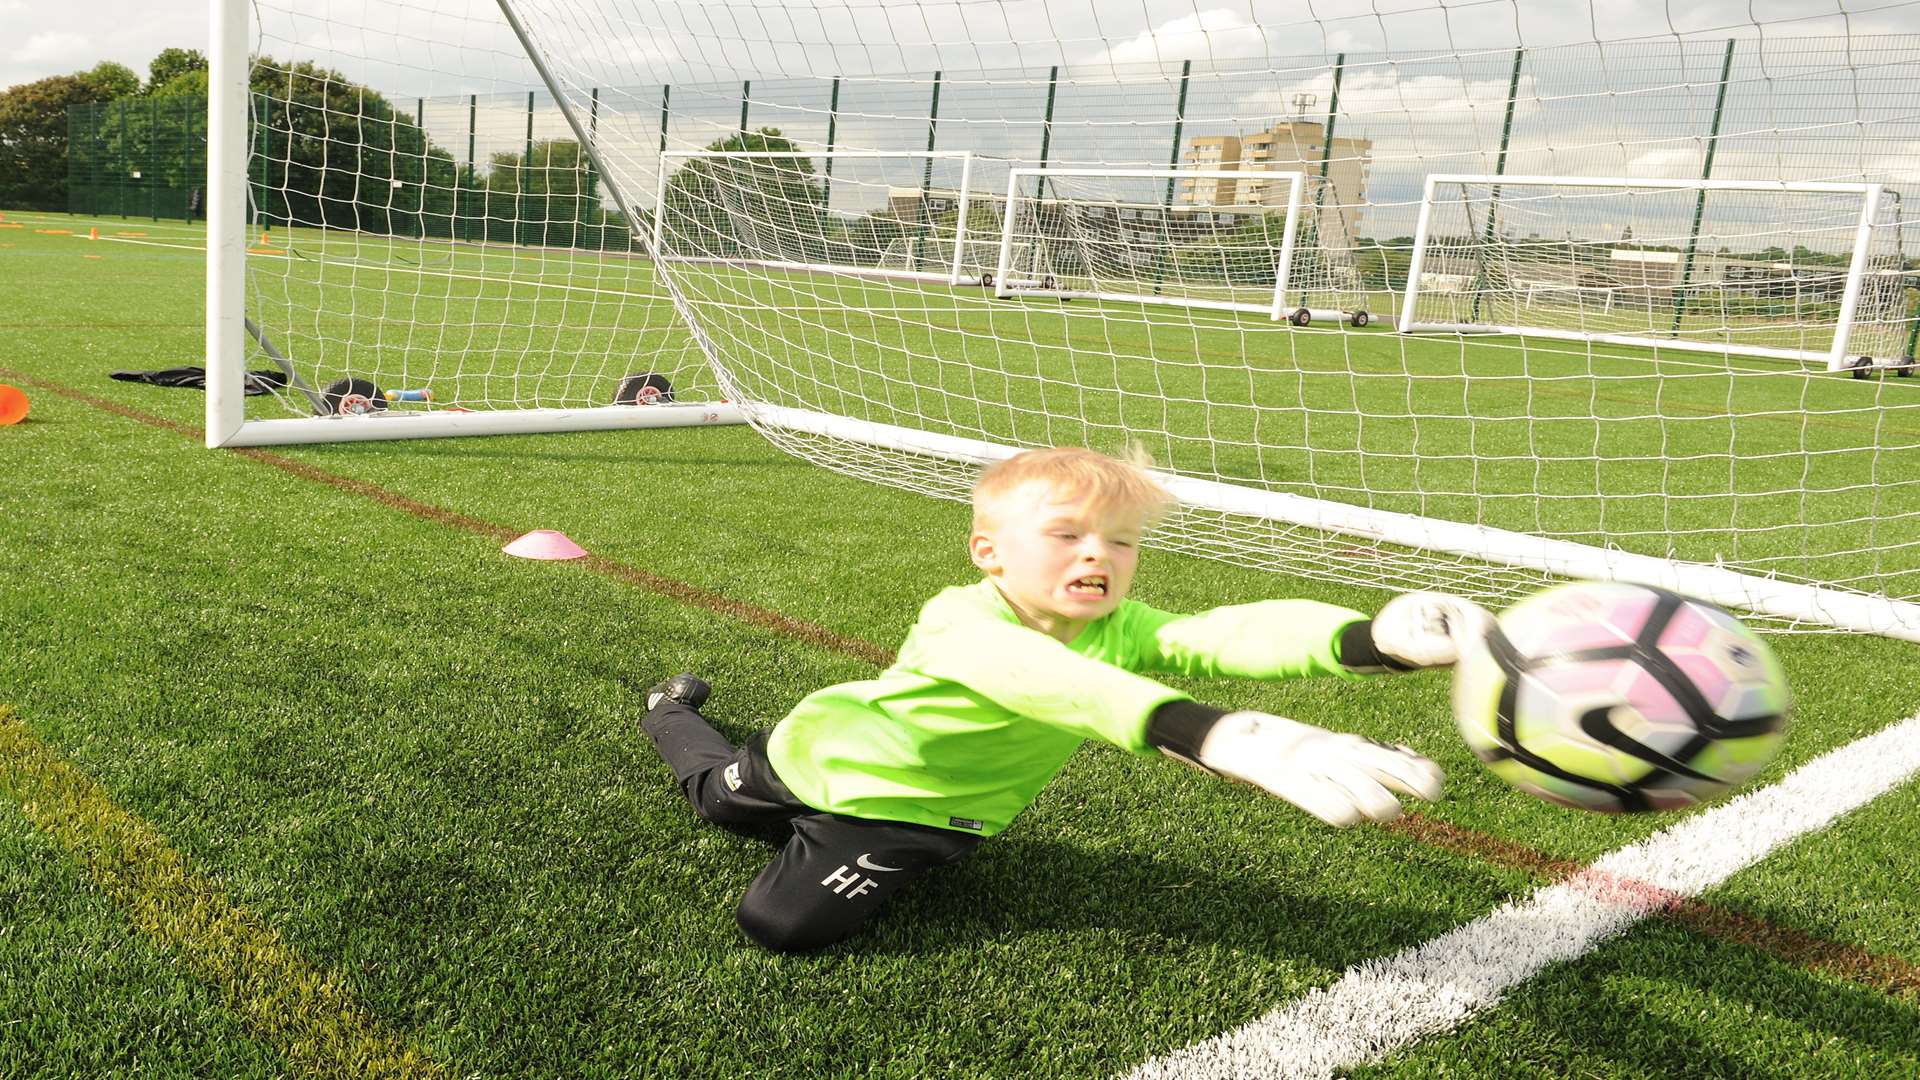 Fine save from young Harry Fowle at Pro Soccer coaching Picture: Steve Crispe